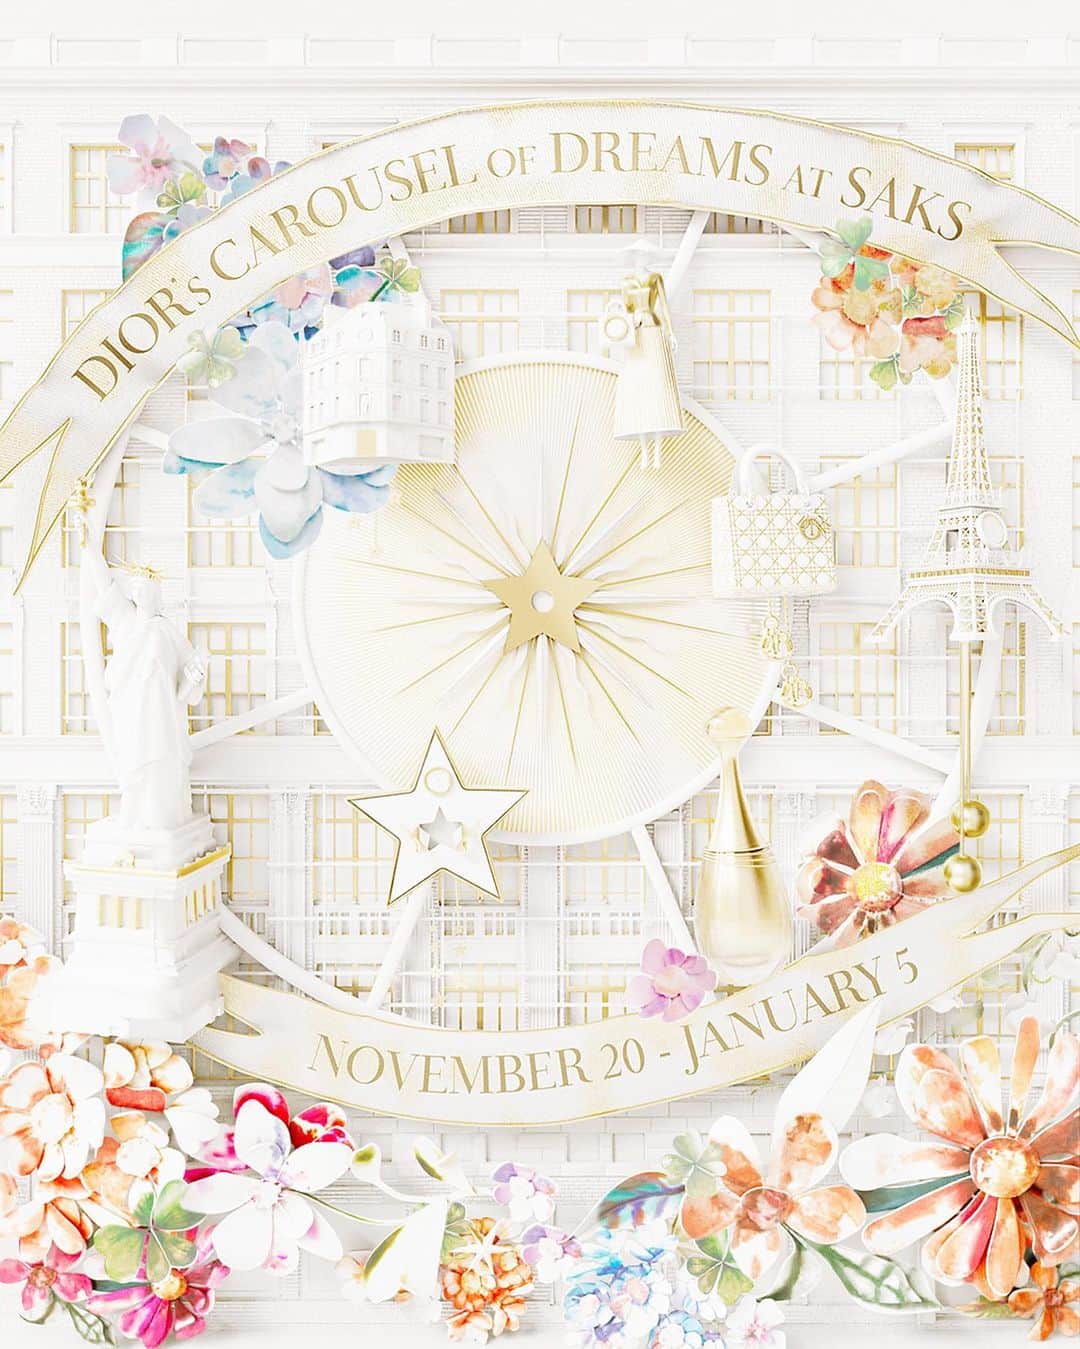 Saks Fifth Avenueのインスタグラム：「It’s a one-of-a-kind holiday season this year— @saks and @dior are celebrating together with Dior’s Carousel of Dreams at Saks. Launching Monday, November 20, an exclusive pop-up at saks.com will include the women's Cruise 2024 collection and men's Spring 2024 collection, baby, maison and La Collection Privée Christian Dior. The collaboration will also transform the Saks NYC Flagship with an iconic light show and holiday window display presented by @mastercard. #CarouselofDreams #Saks」